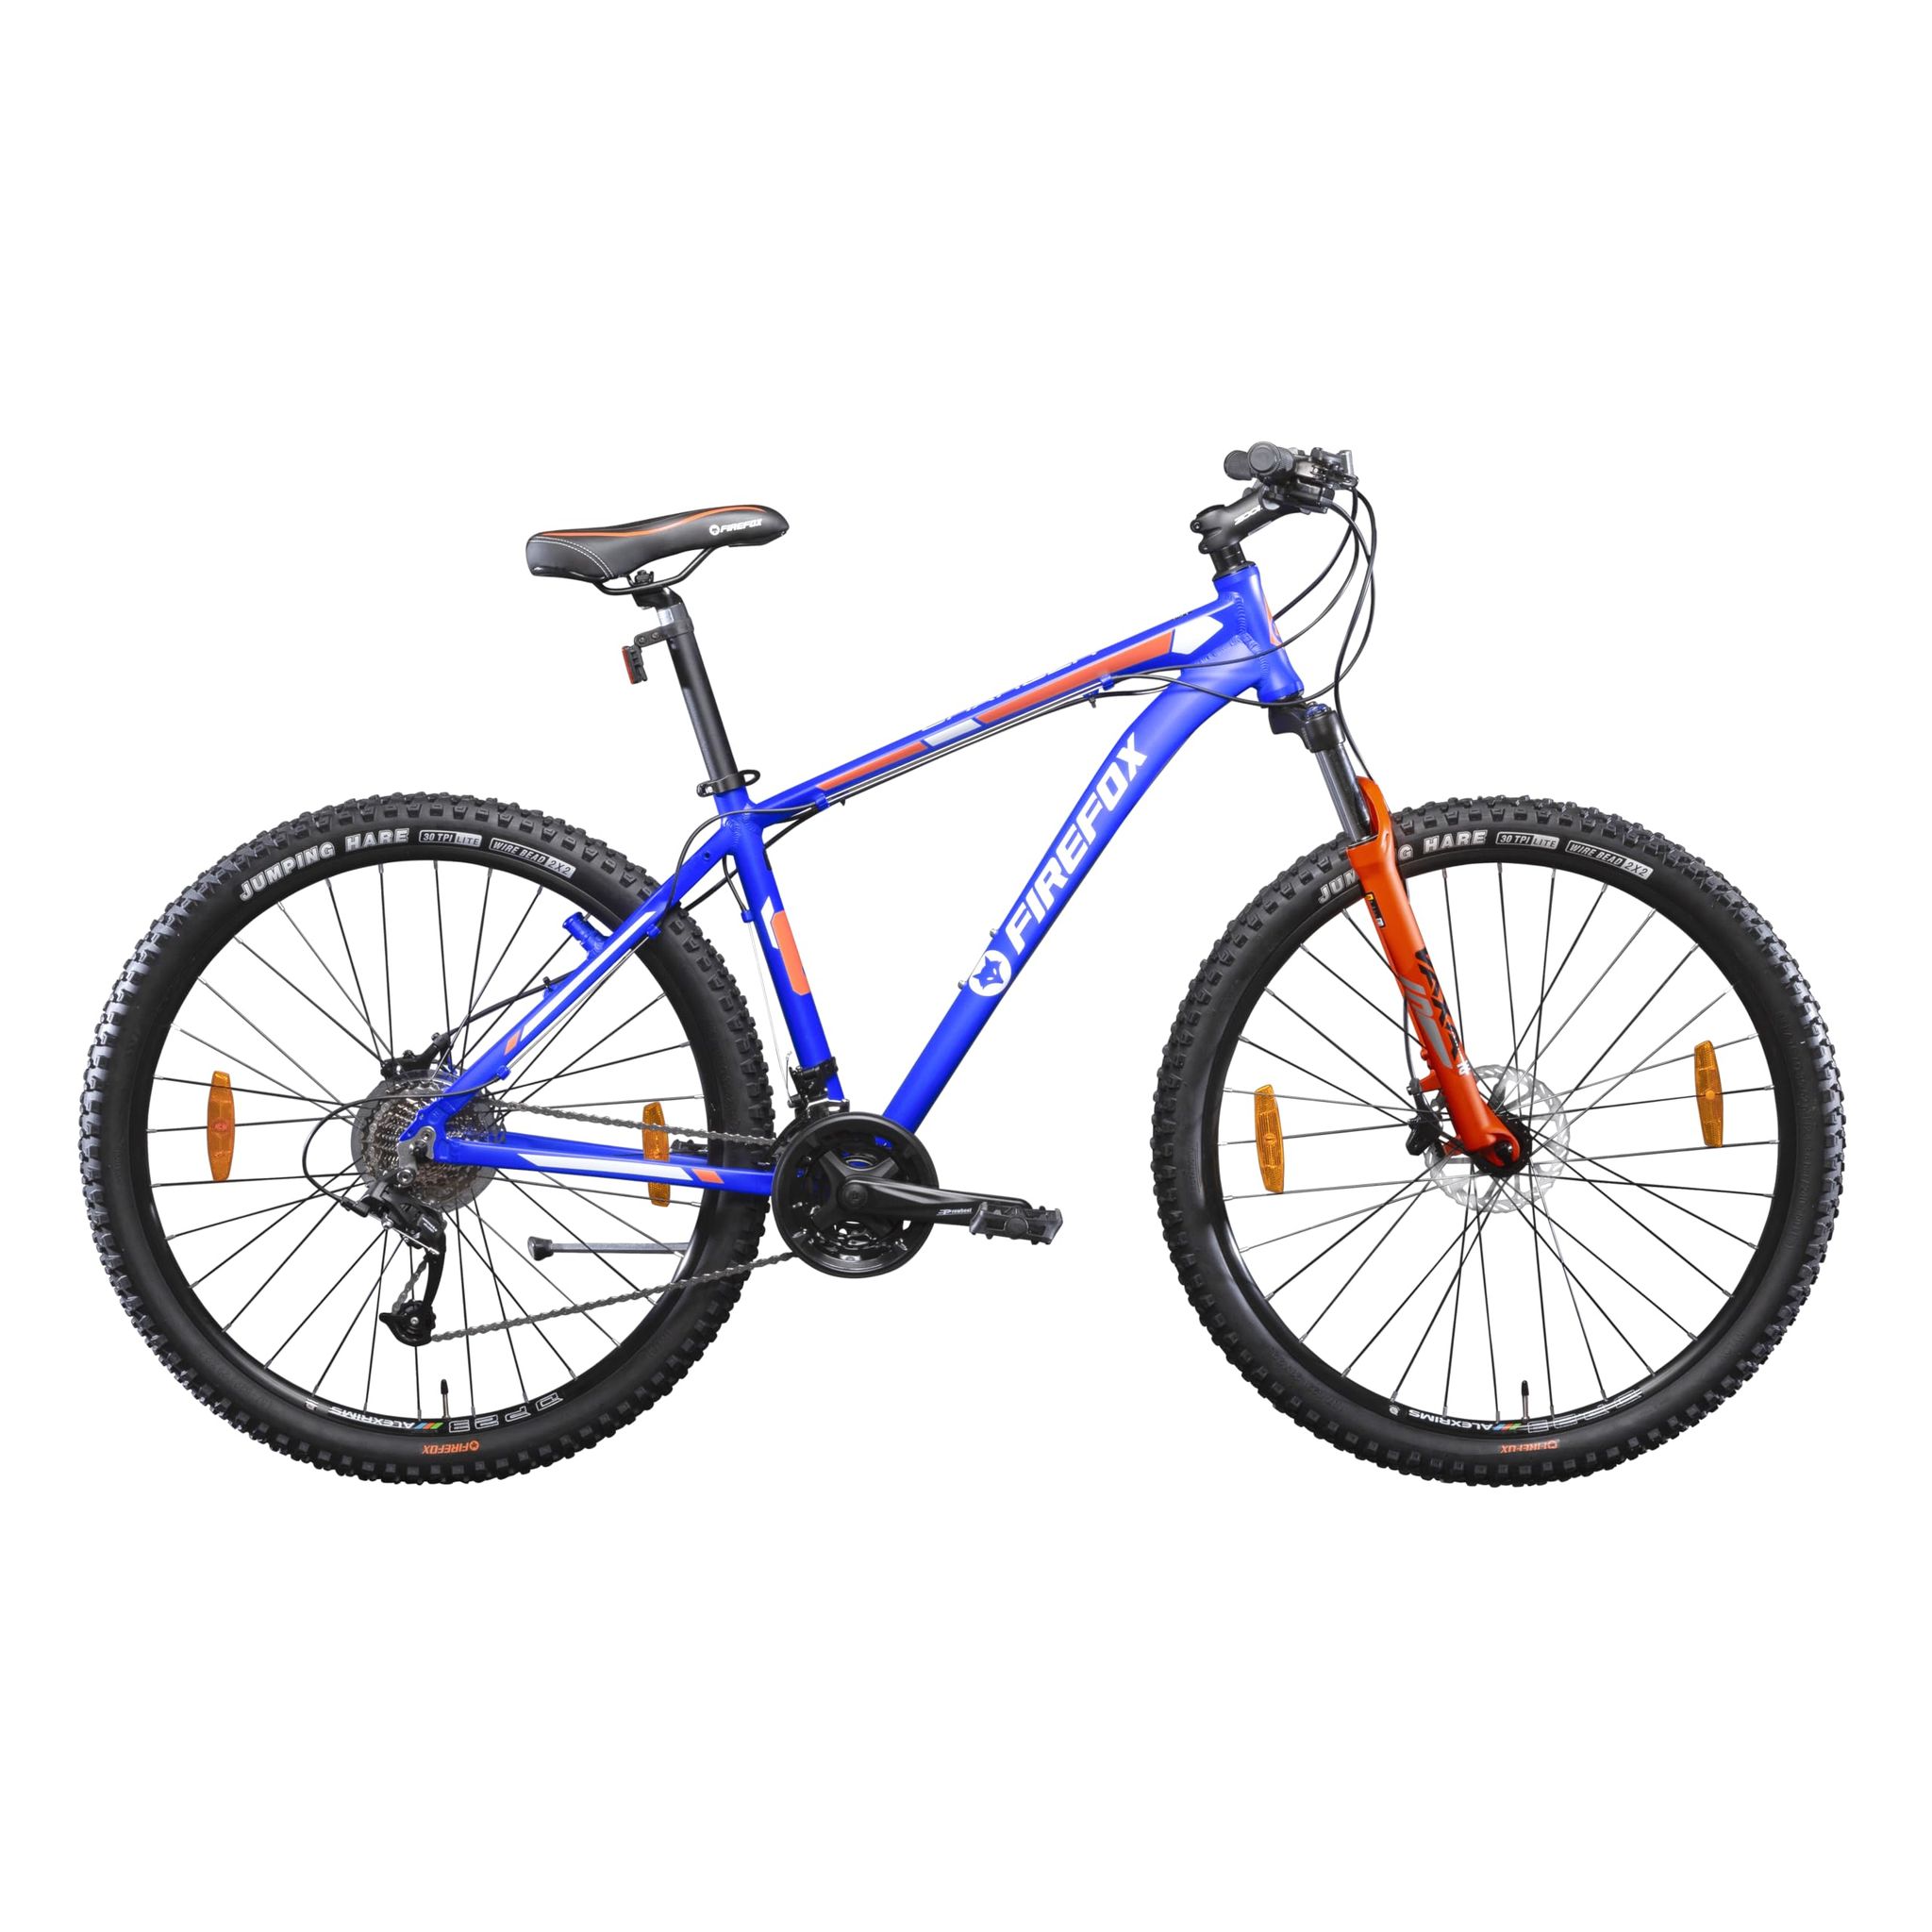 FIREFOX Charger 29 D 29 T Mountain Cycle (27 Gear, Black, Blue) | Frame 16.5 Inch | 98% Assembled Cycle